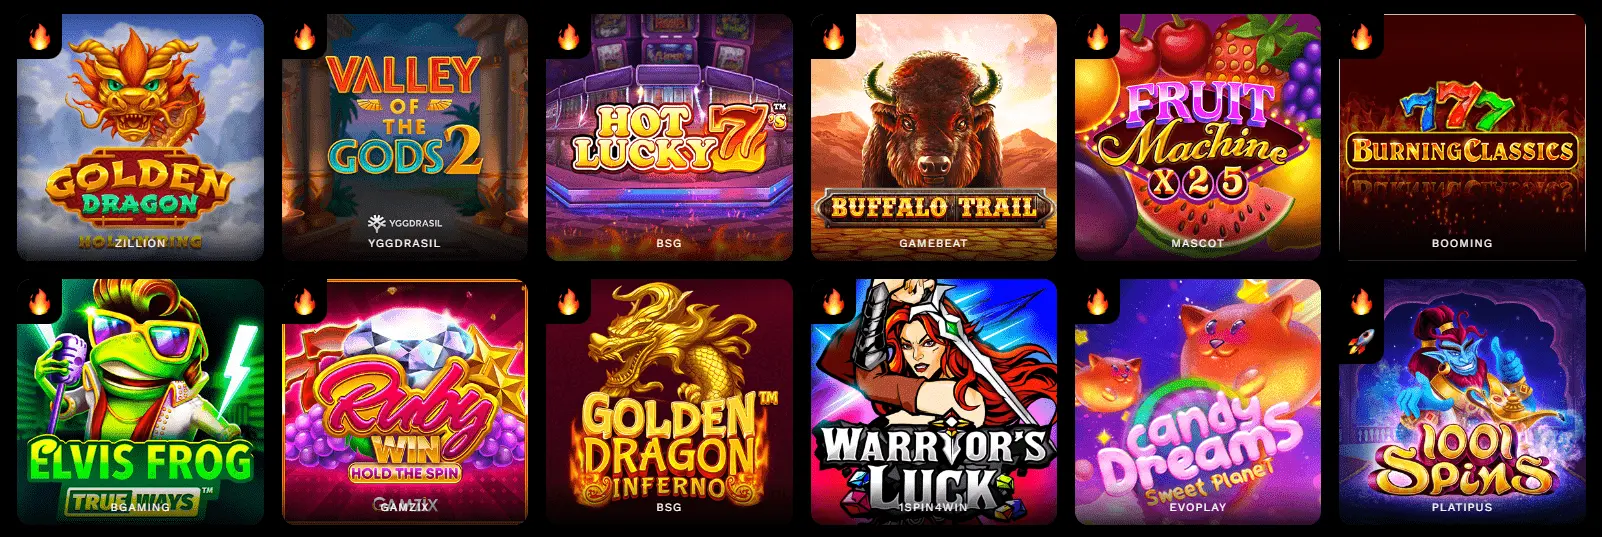 top-games-level-up-casino